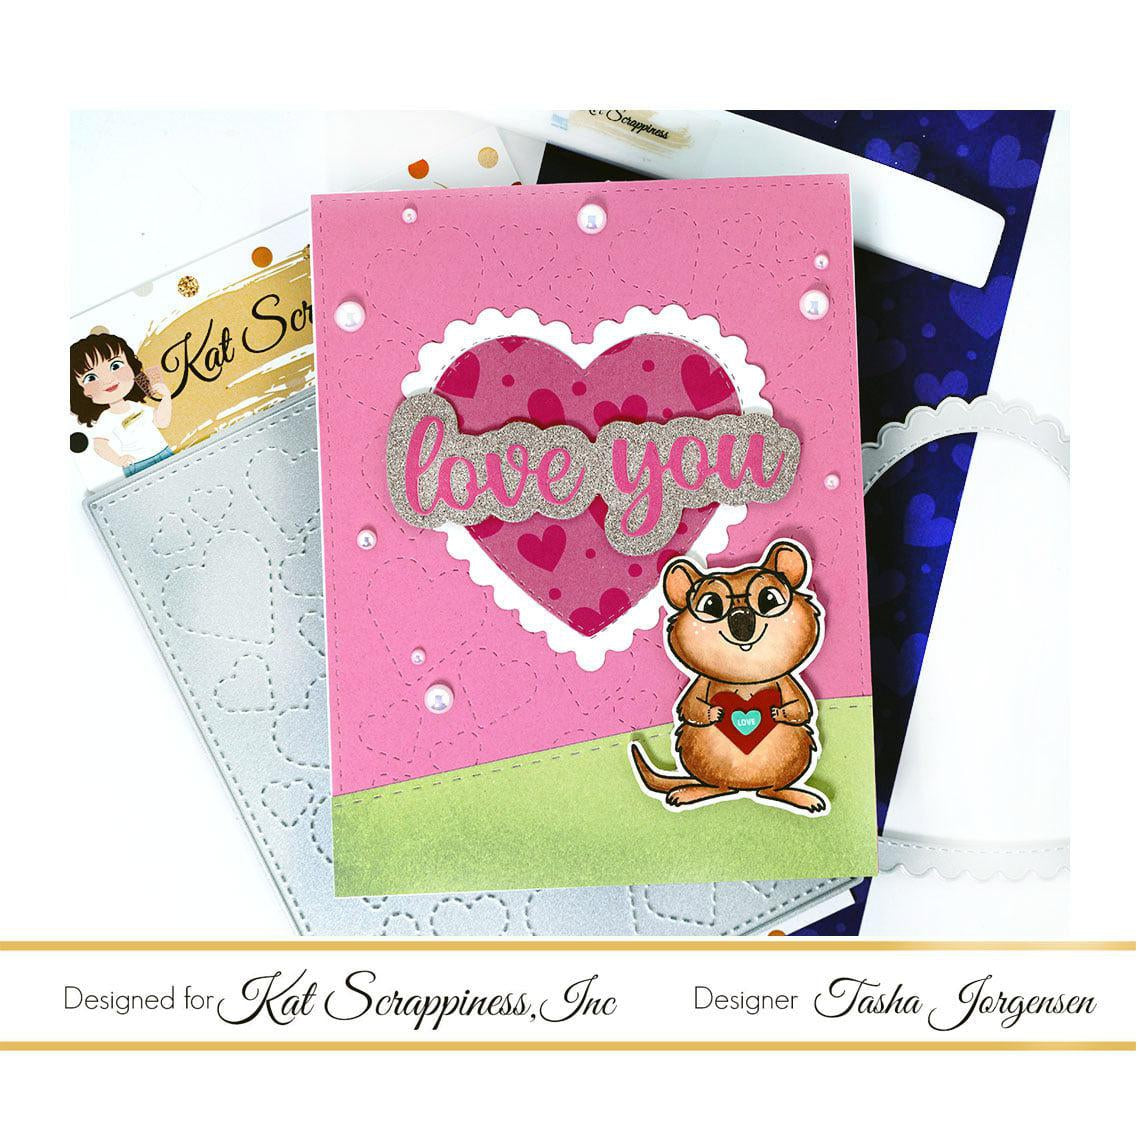 Double Stitched Heart Dies by Kat Scrappiness - Kat Scrappiness